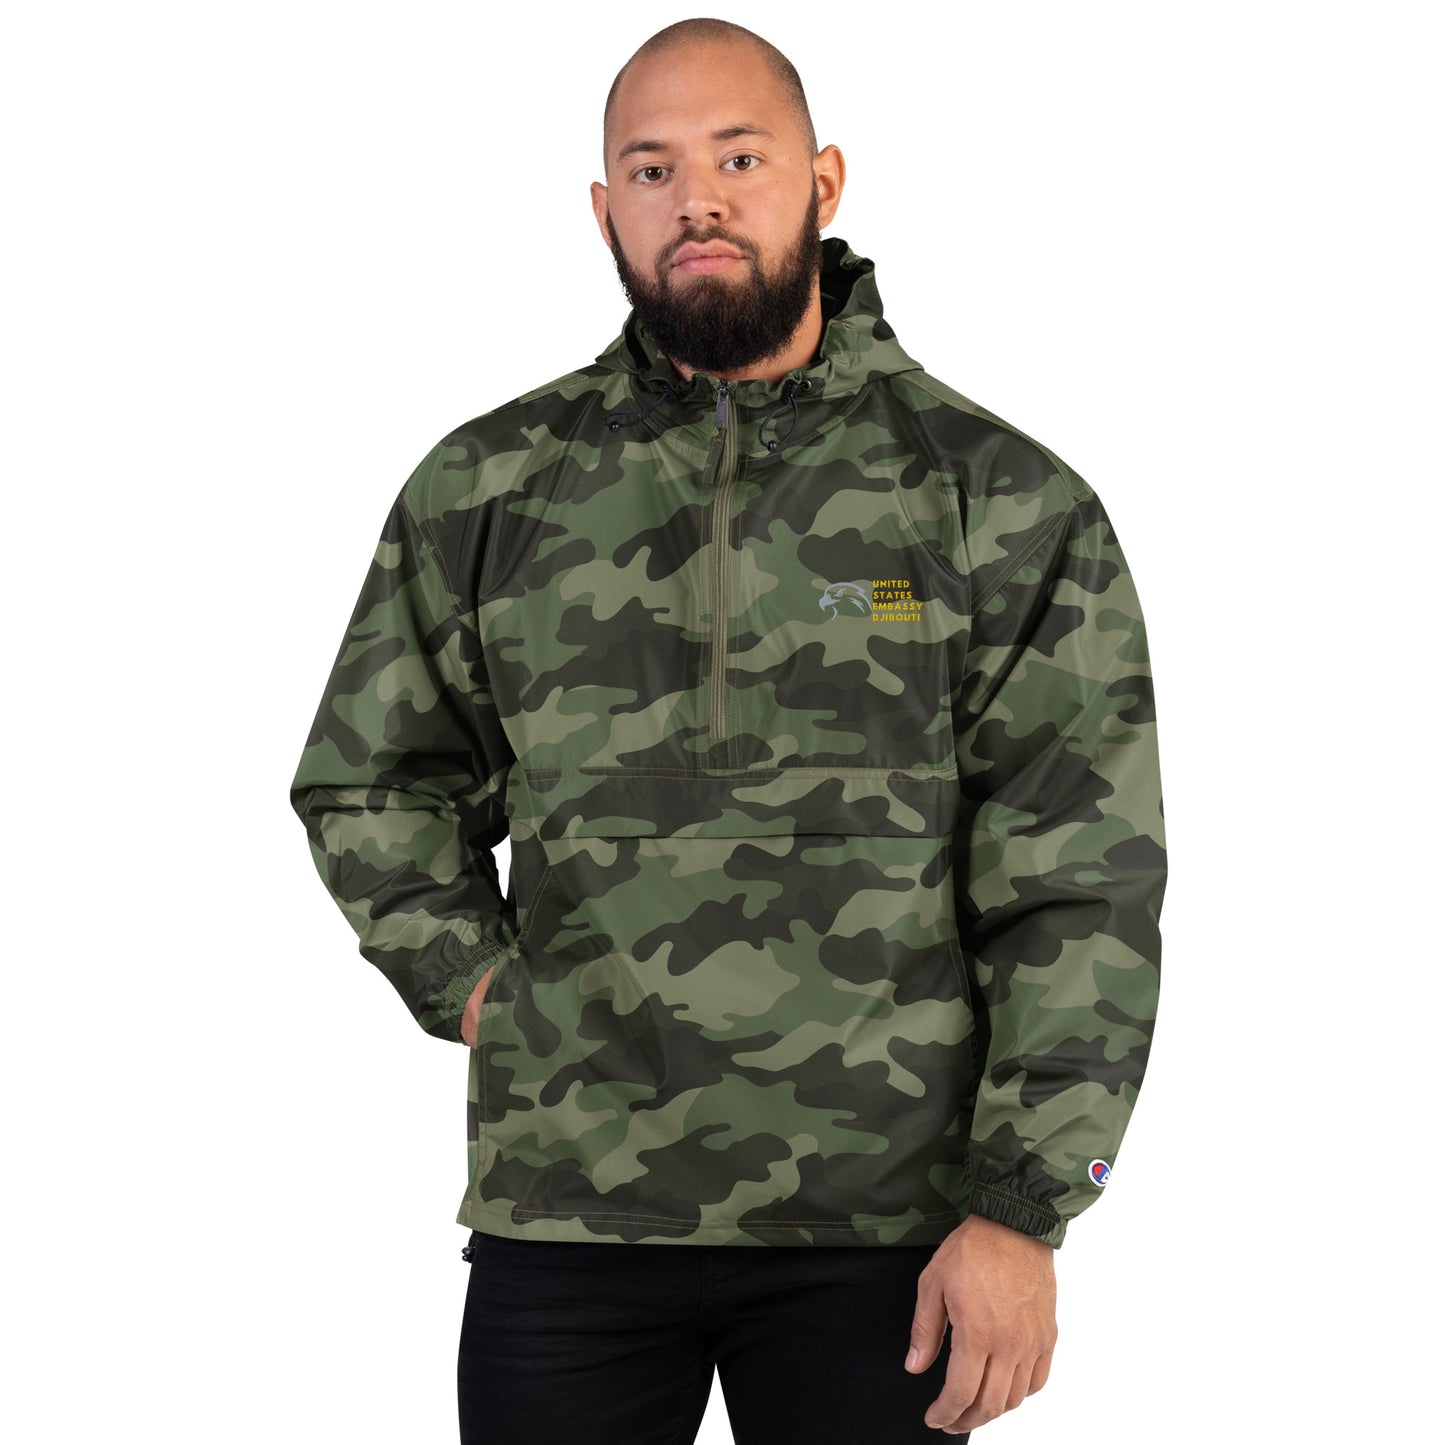 Champion Brand Embroidered Packable Jacket: Djibouti